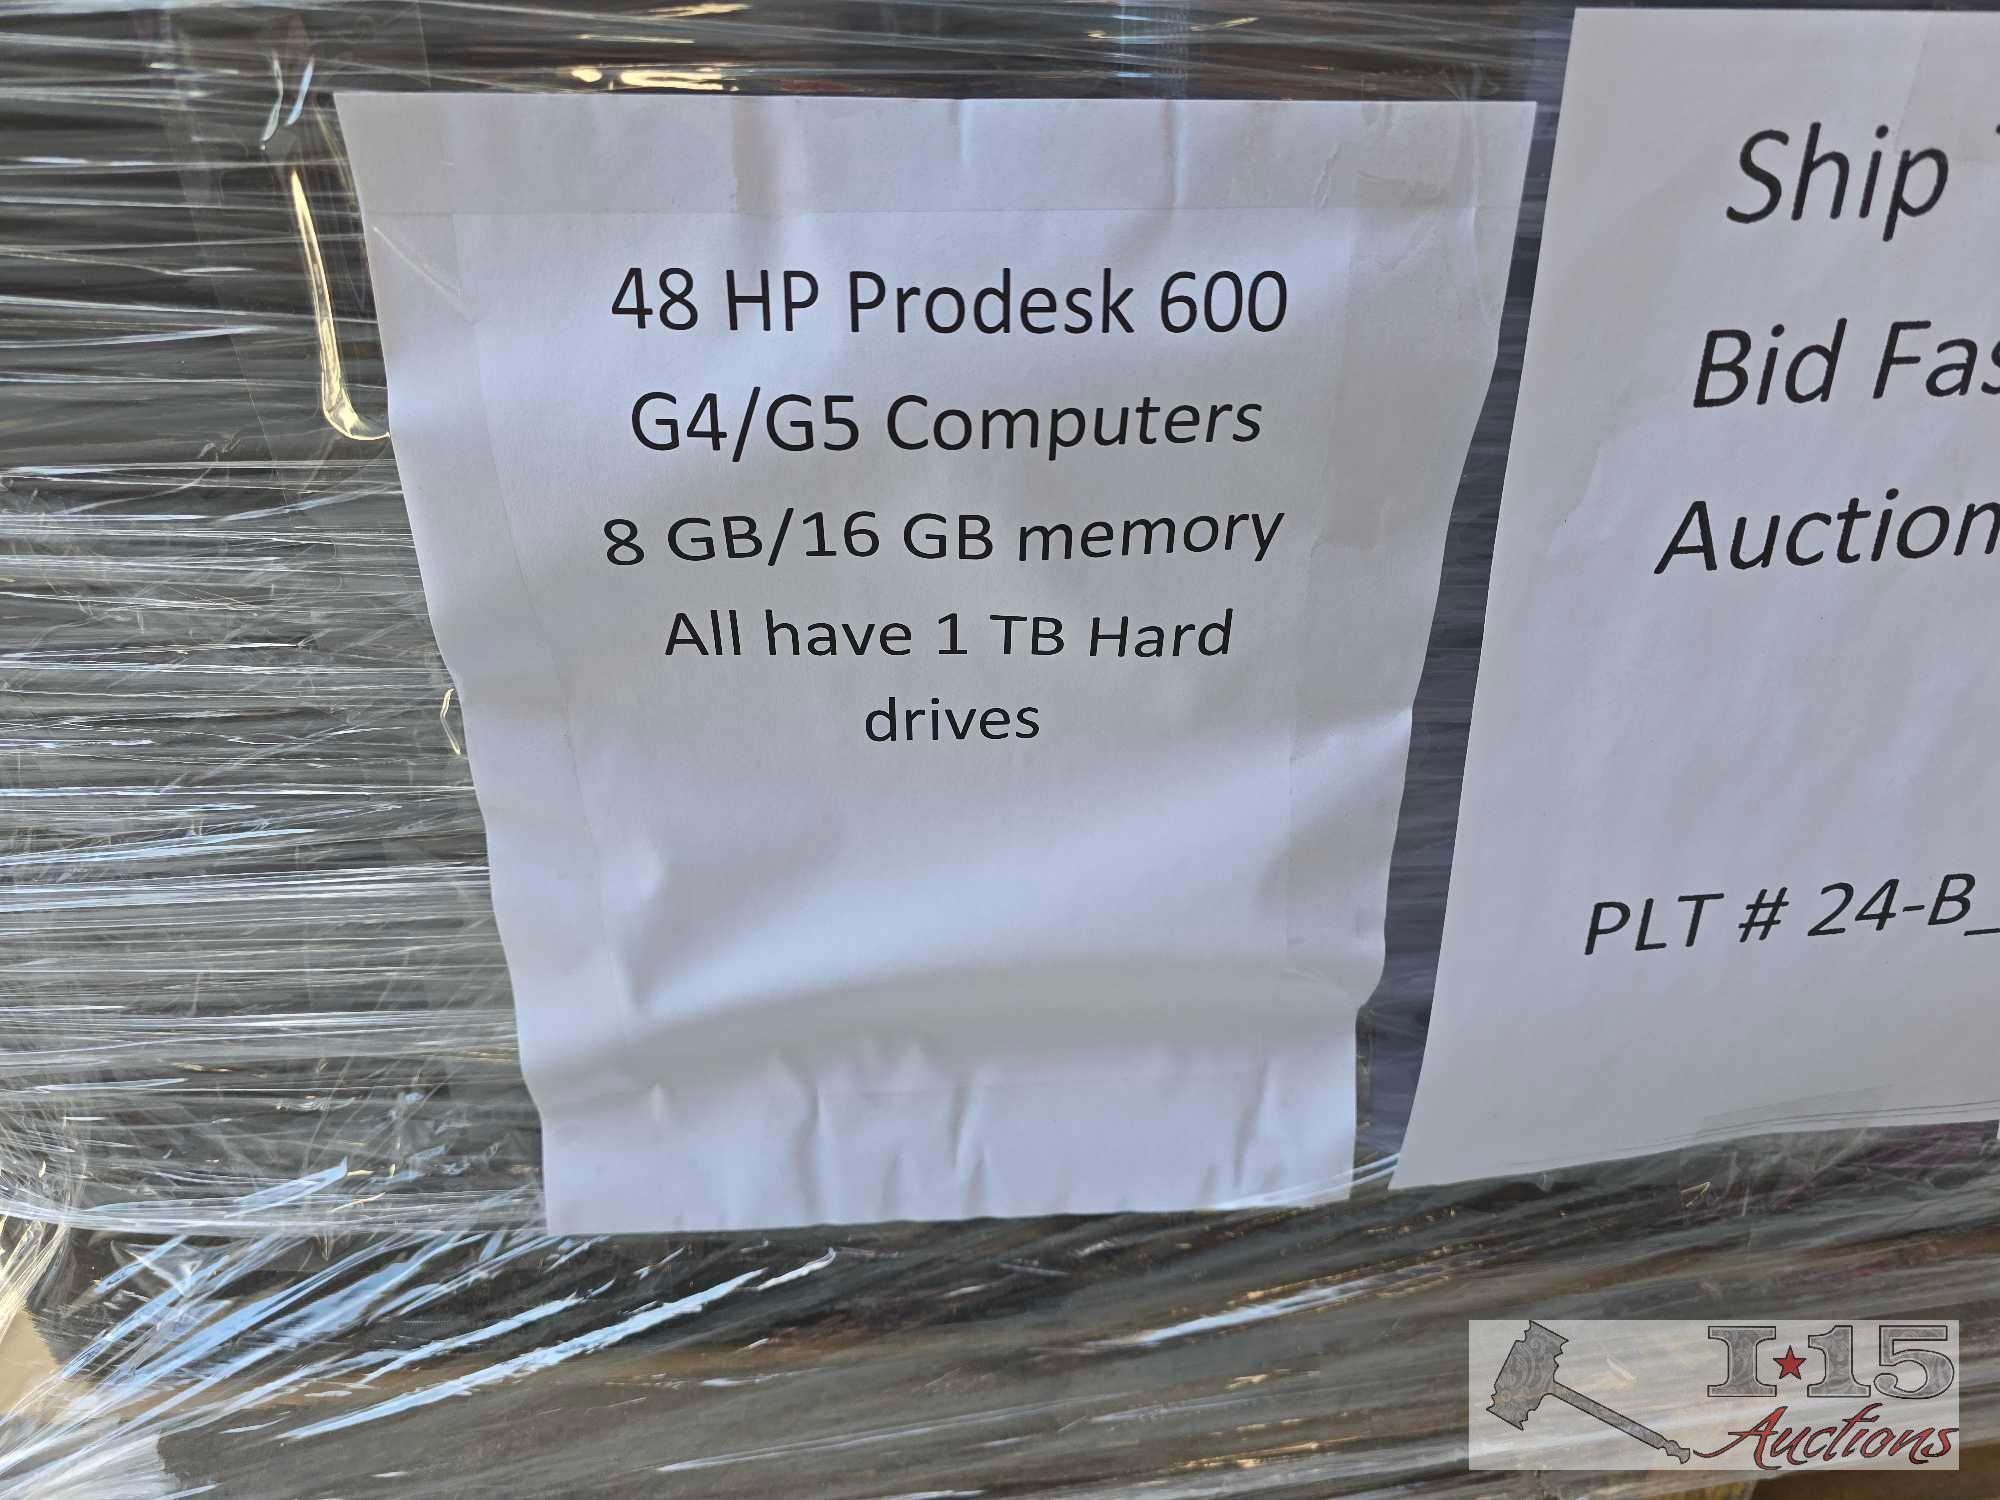 48 HP Prodesk 600 G4/G5 Computers